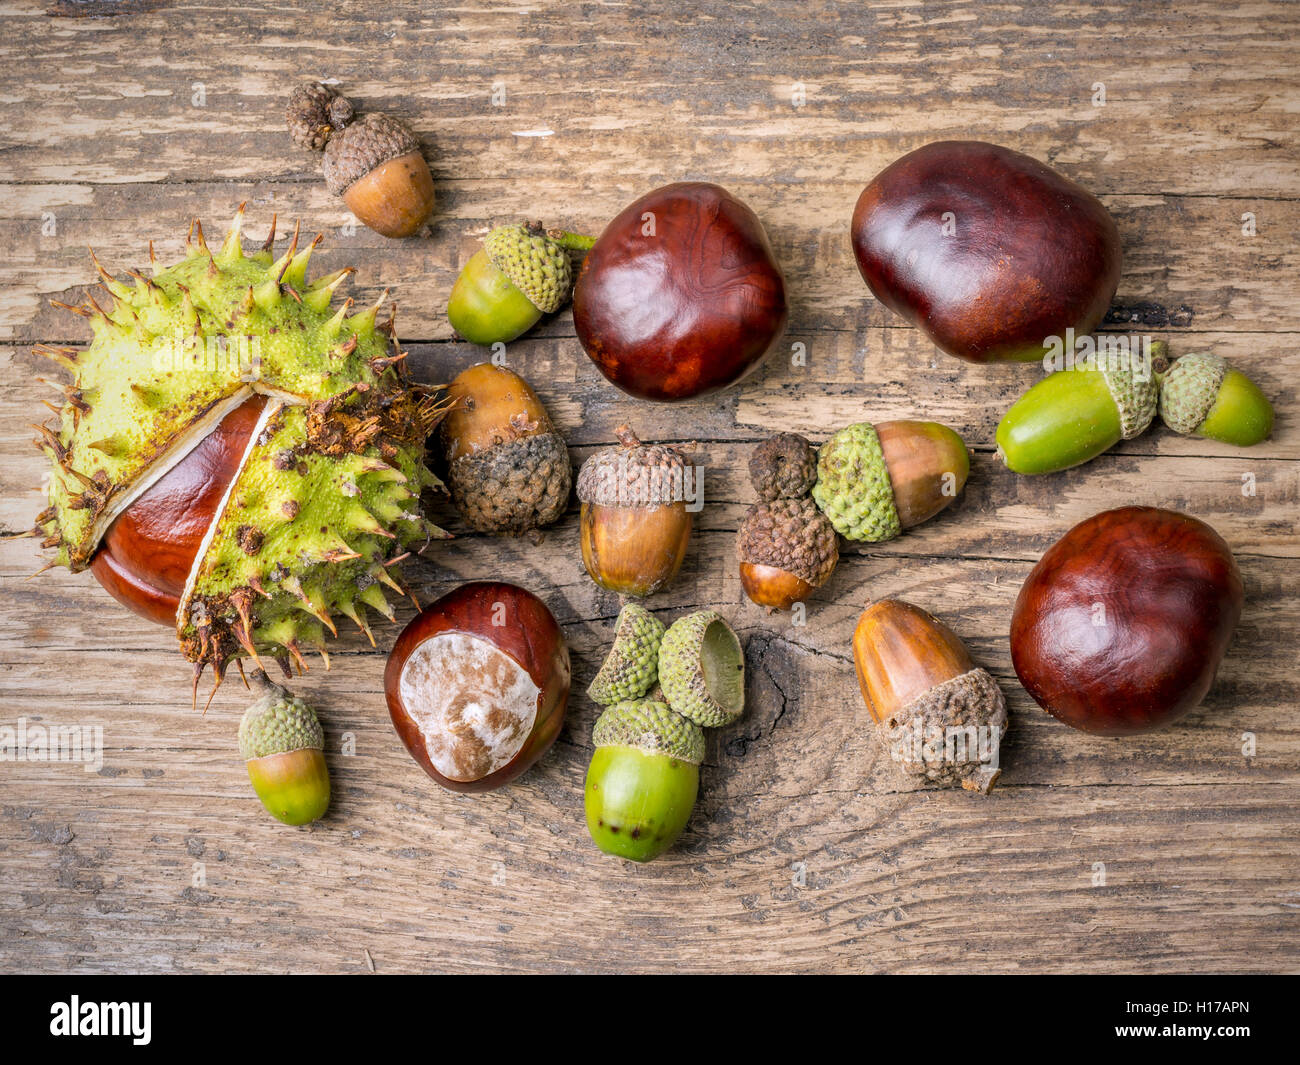 Chestnuts and acorns on wooden plank shot from above Stock Photo